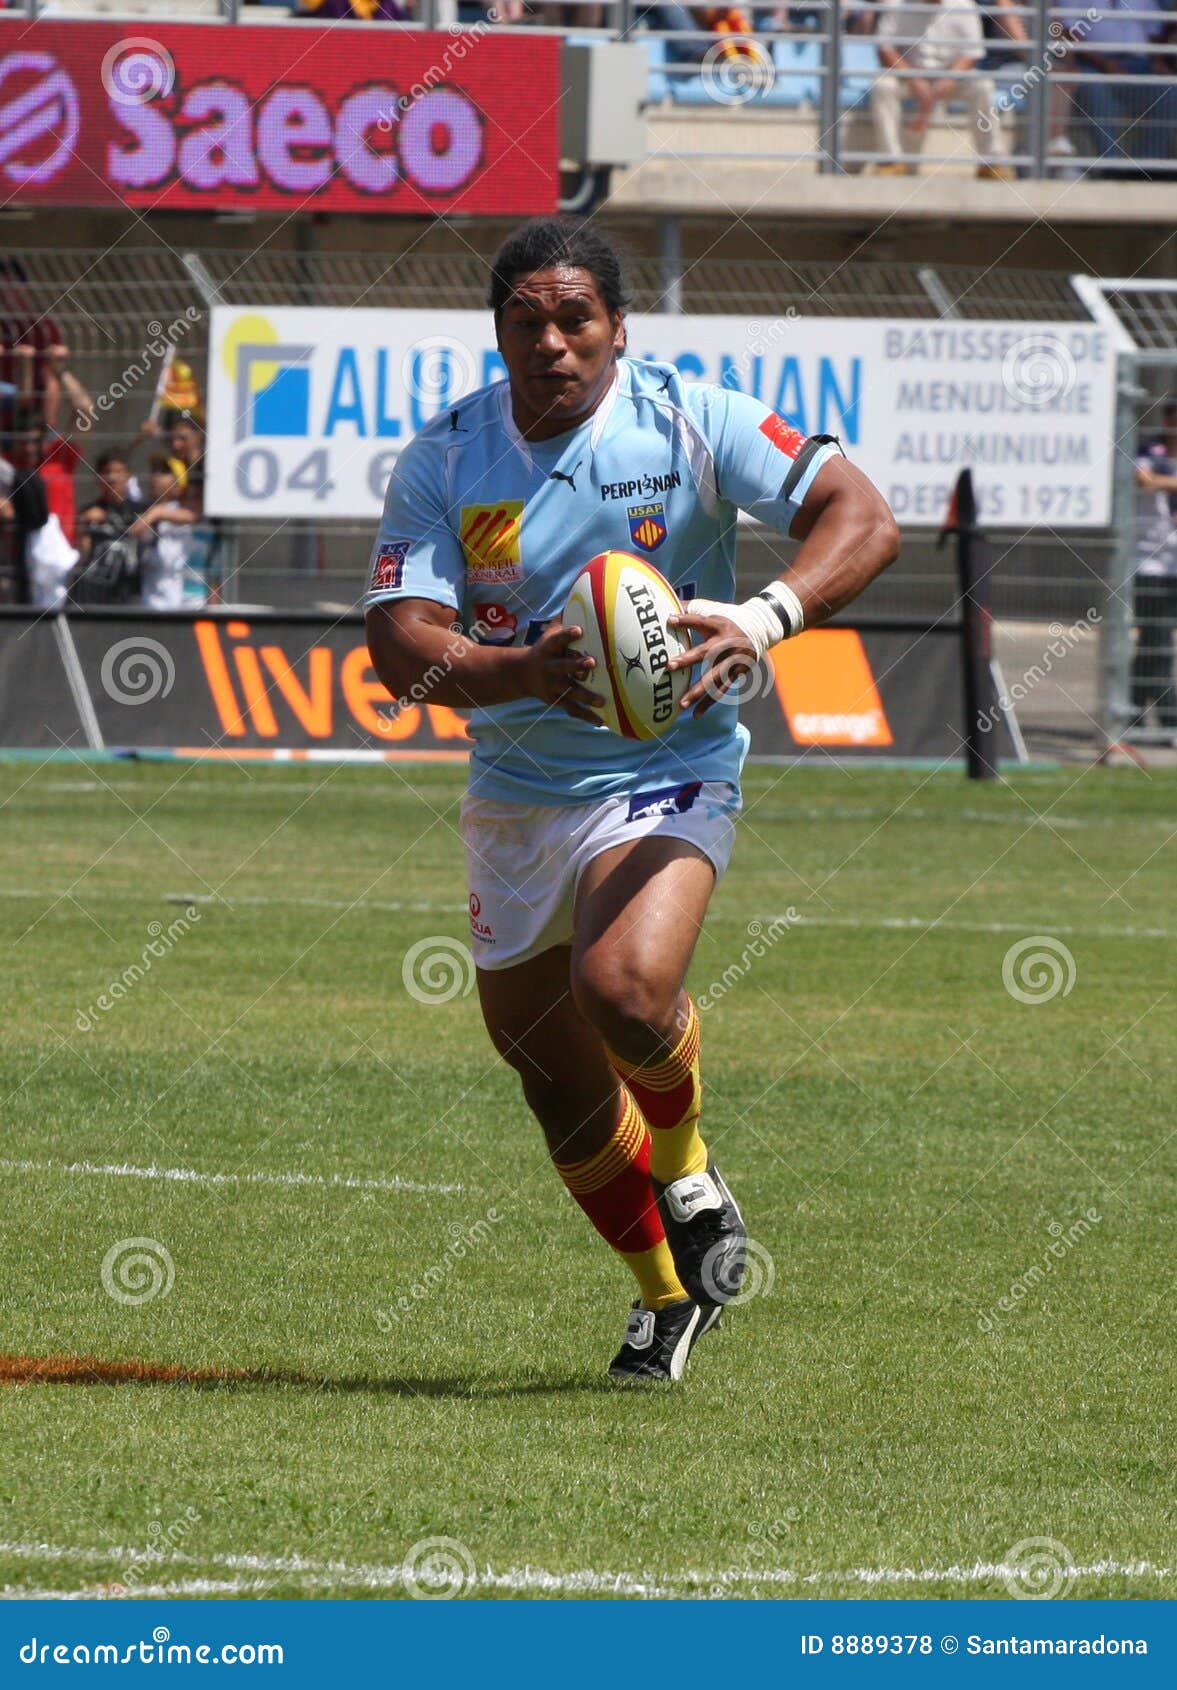 Top 14 Rugby Match USAP Vs Stade Francais Editorial Stock Photo